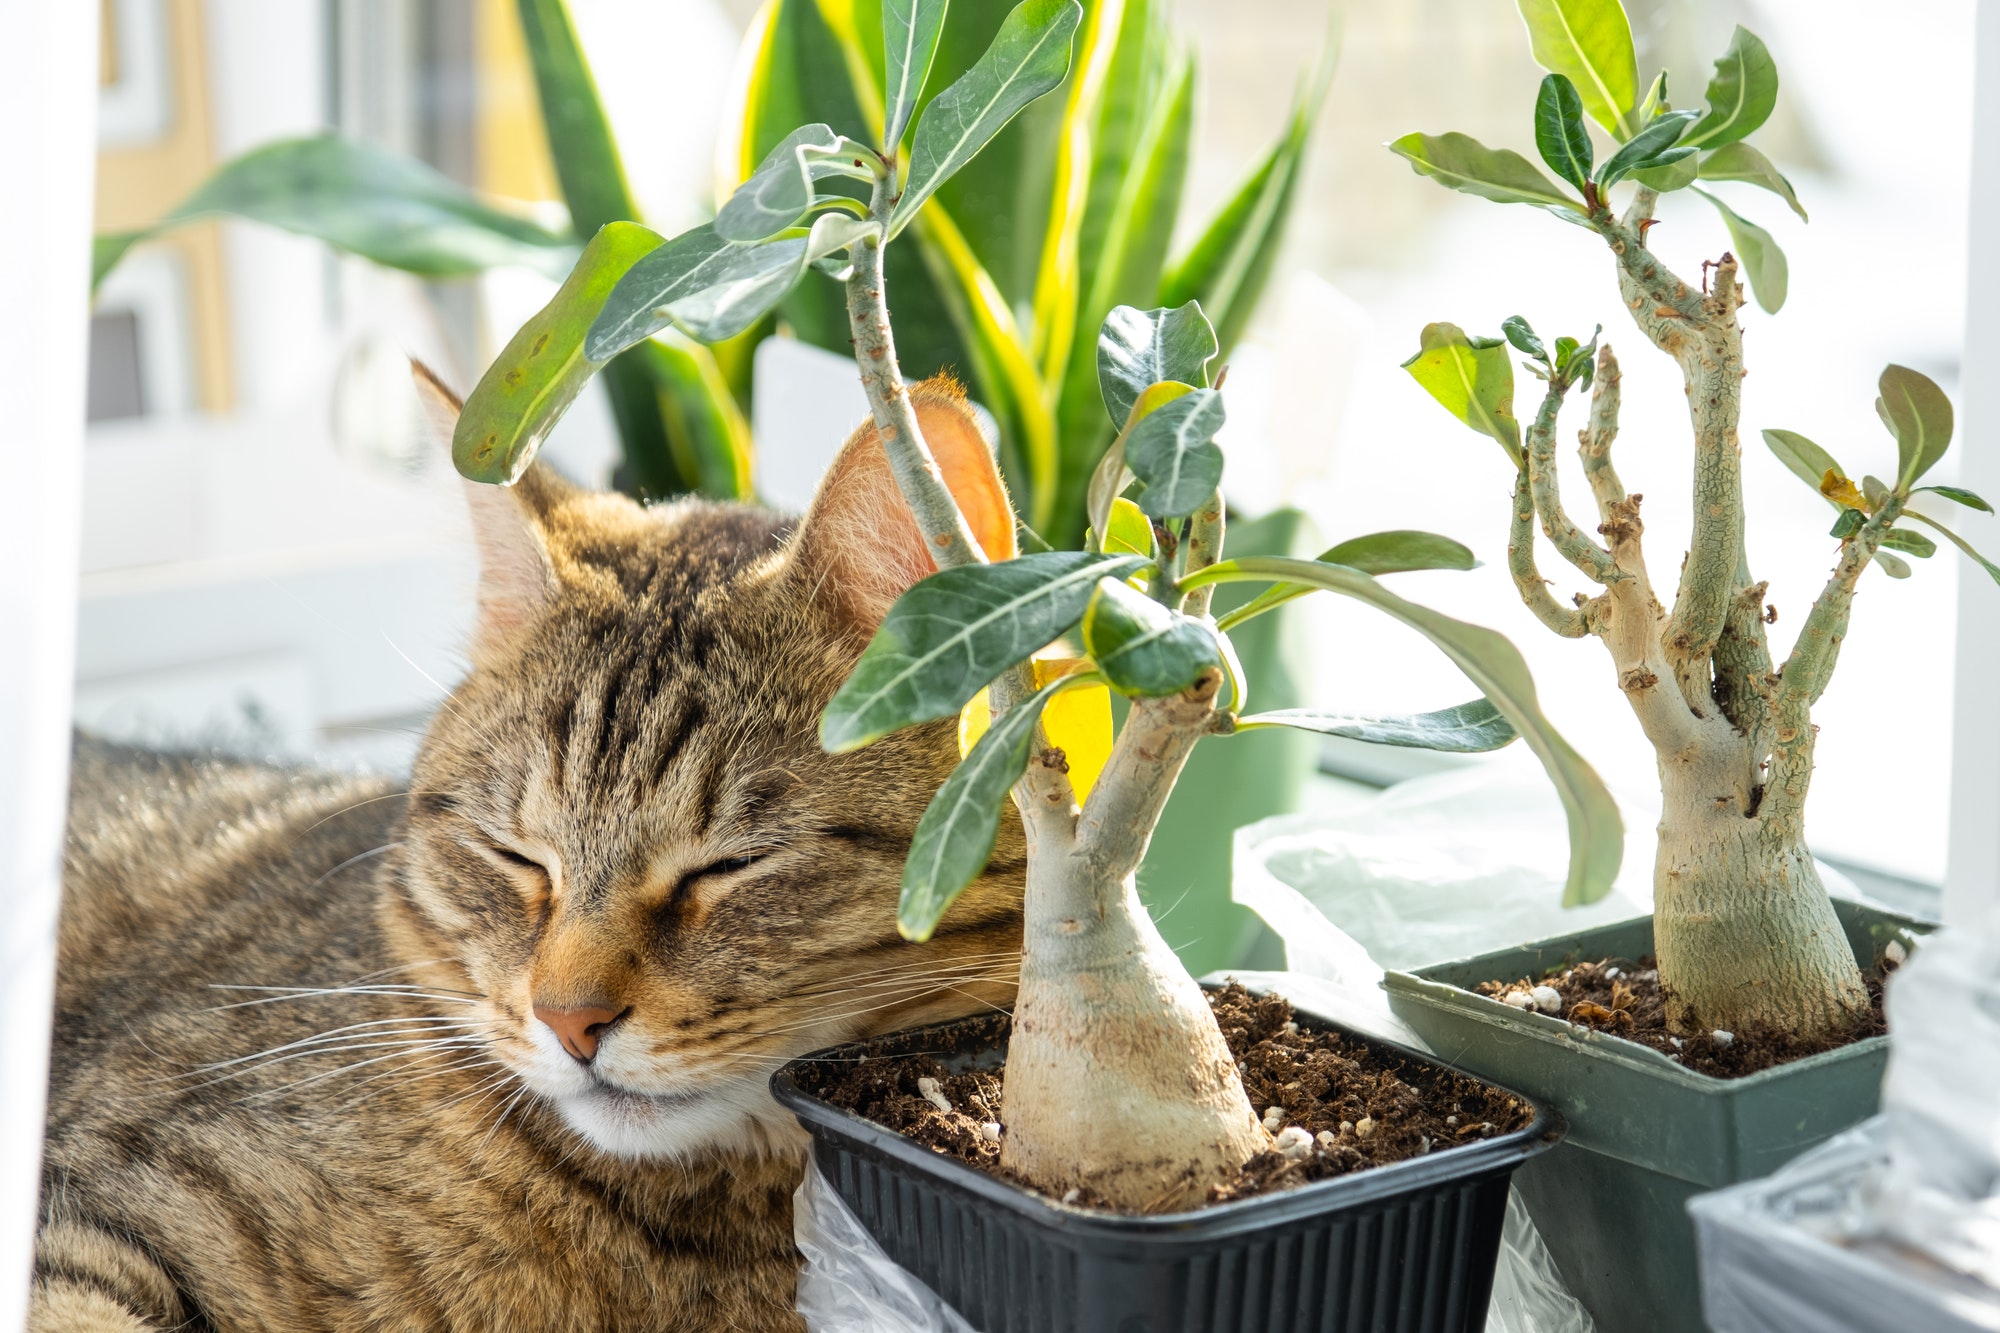 Cat is sleeping on the windowsill with group of indoor plants adenium. The cat's head is lying on a